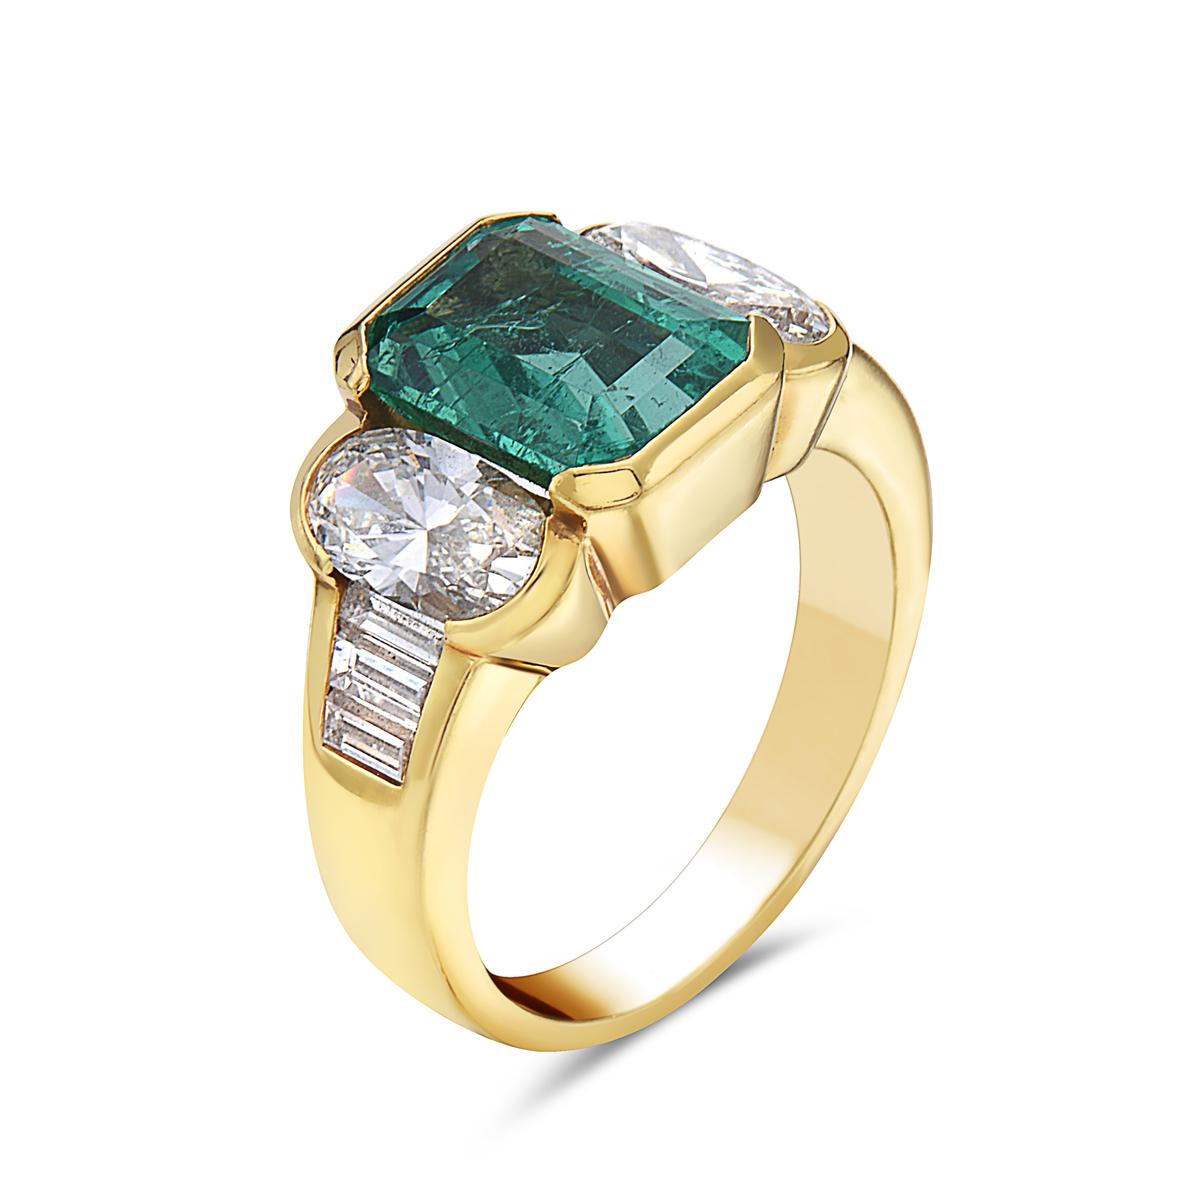 This cocktail ring features a 3.70 carat Emerald flanked by two long oval diamonds and six baguettes weighing 2.50 carats set in 18K yellow gold. Size 6 1/4.

Resizeable upon request.

Viewings available in our NYC showroom by appointment.